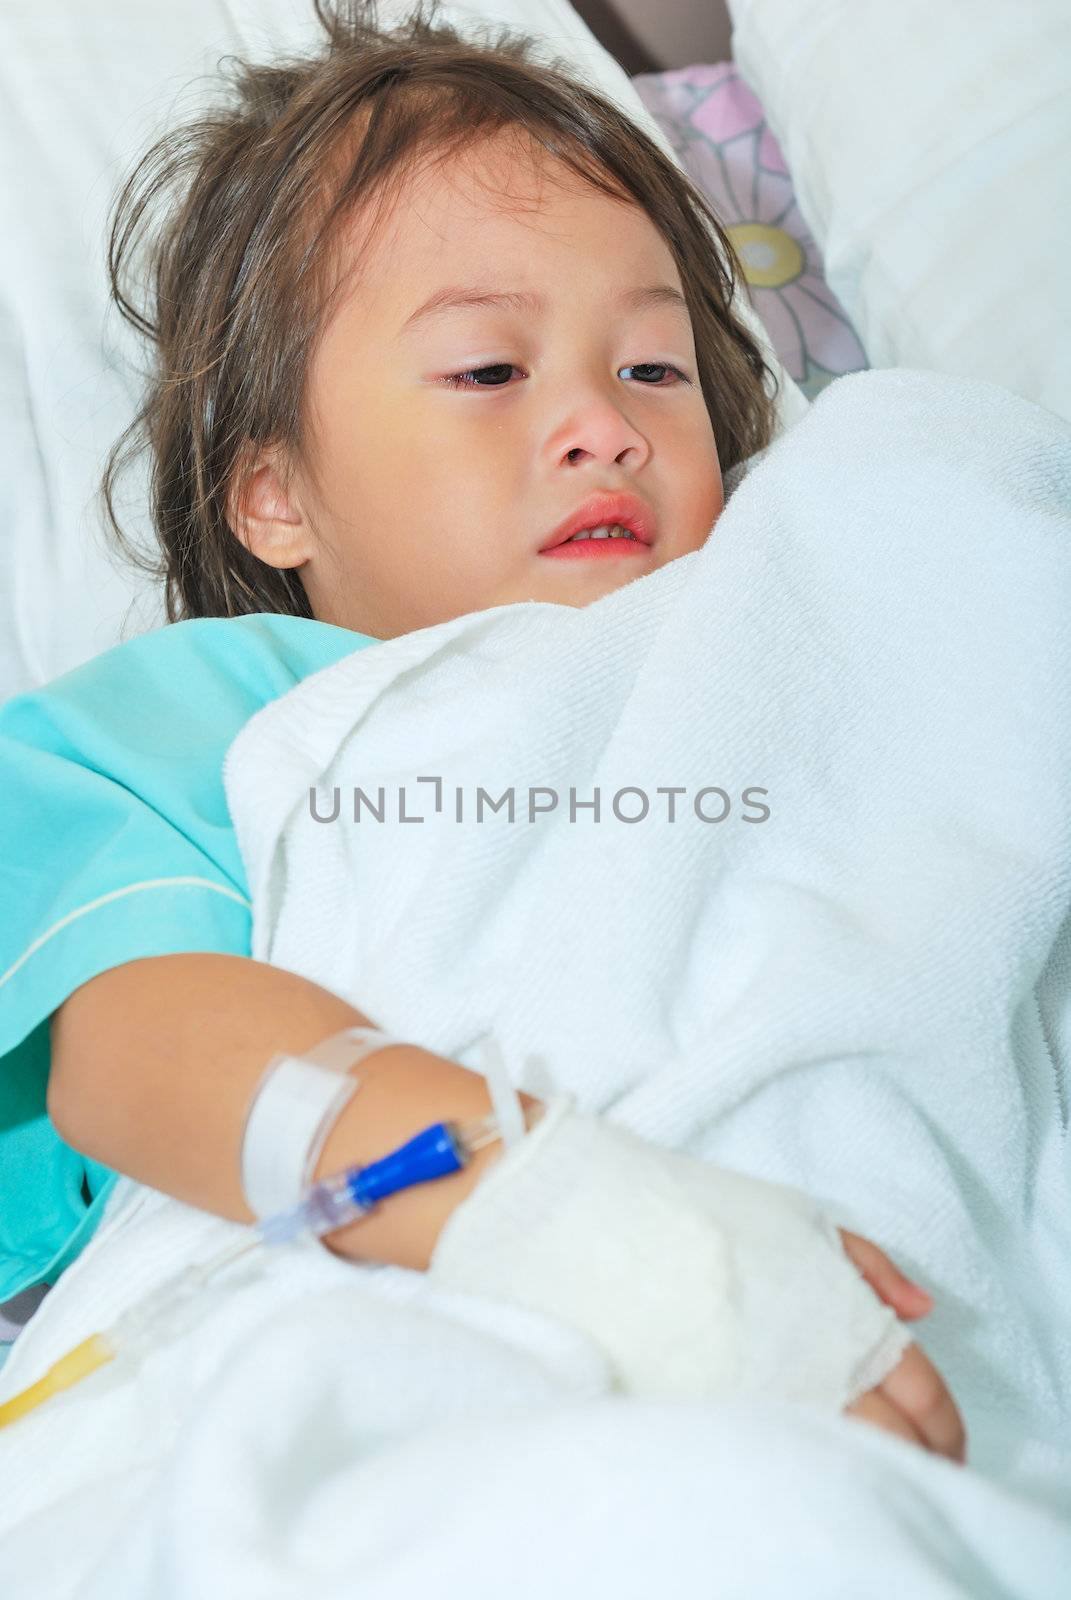 Sick little girl crying in hospital bed by teen00000